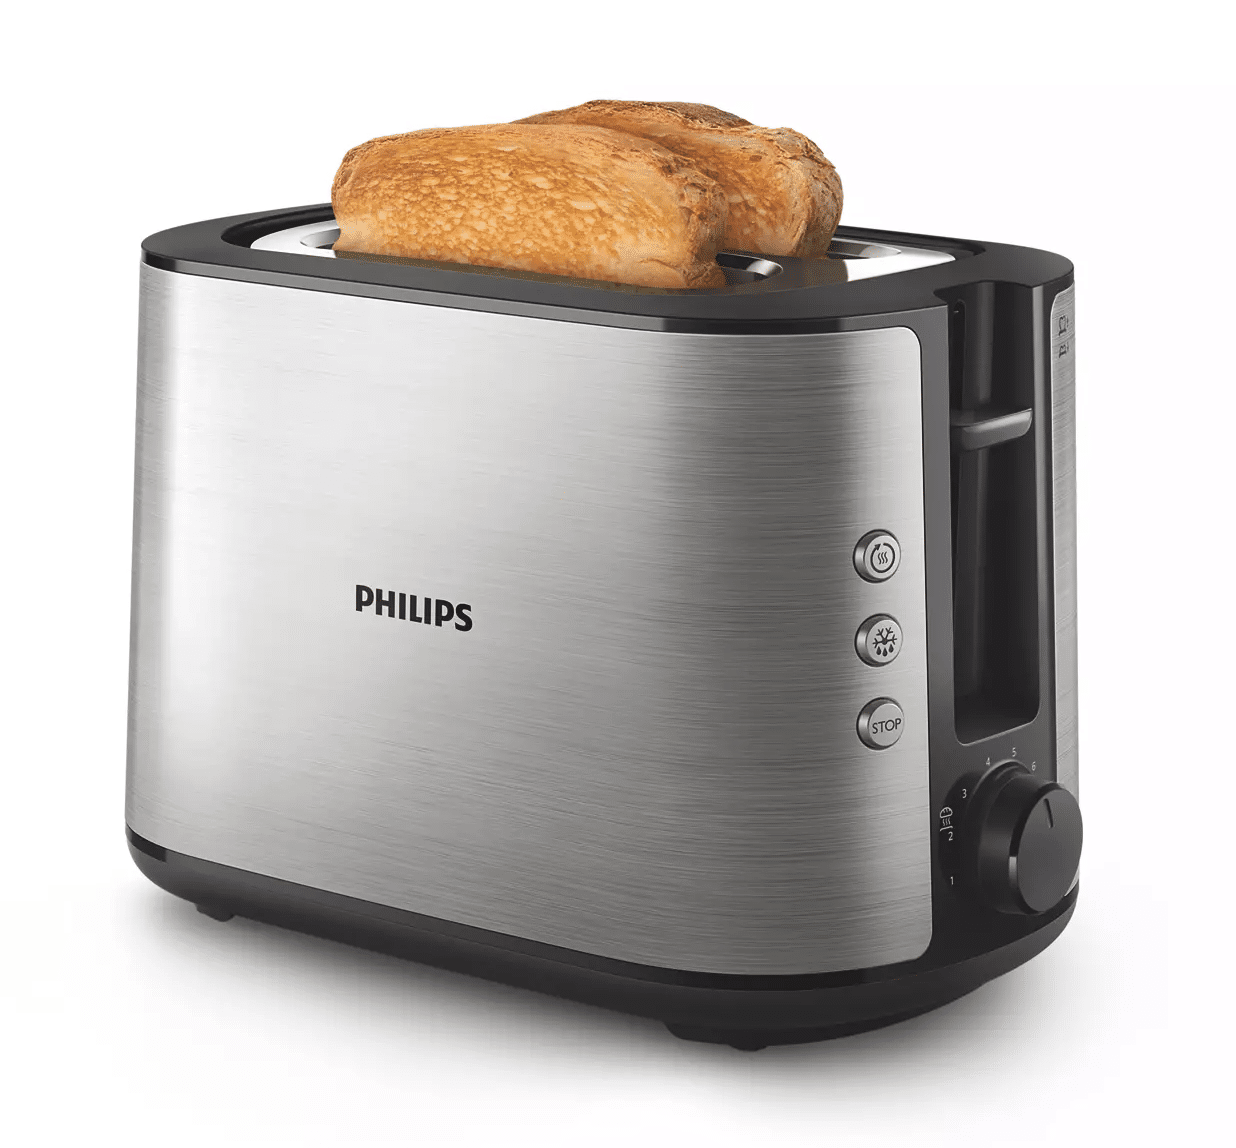 Philips Viva Collection Toaster HD2650/90